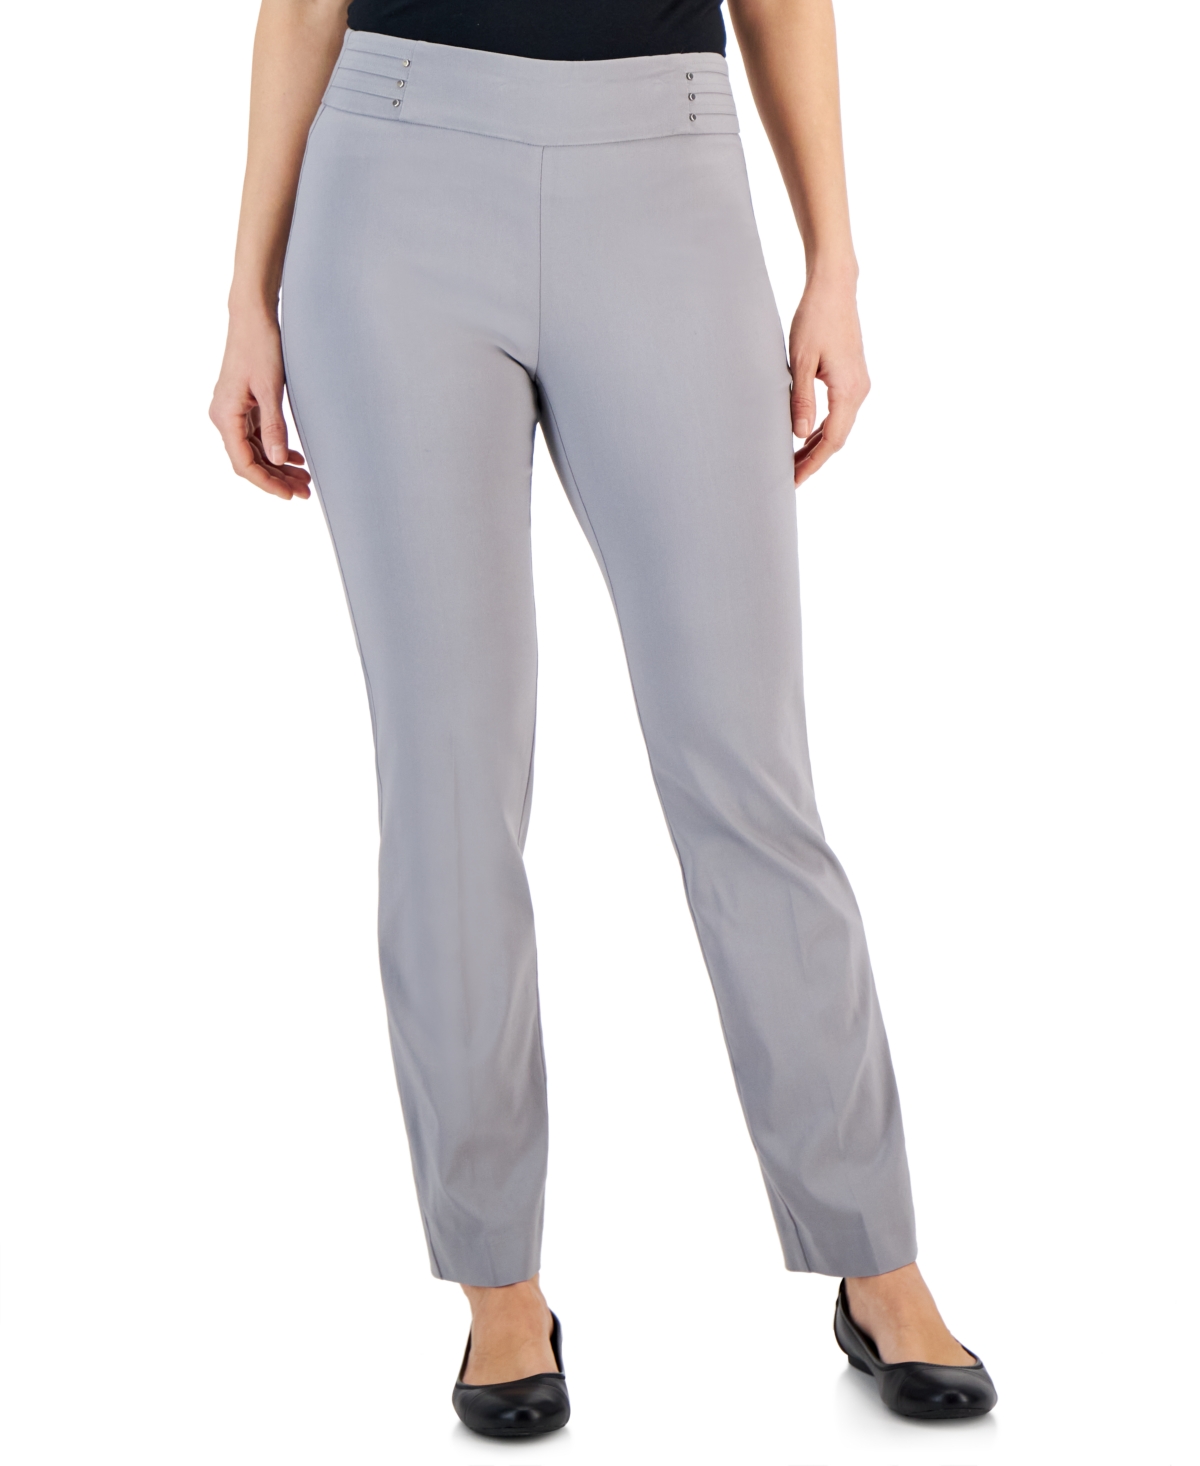 JM Women's Belted Tummy Control Pull-On Pants White Bright M at   Women's Clothing store